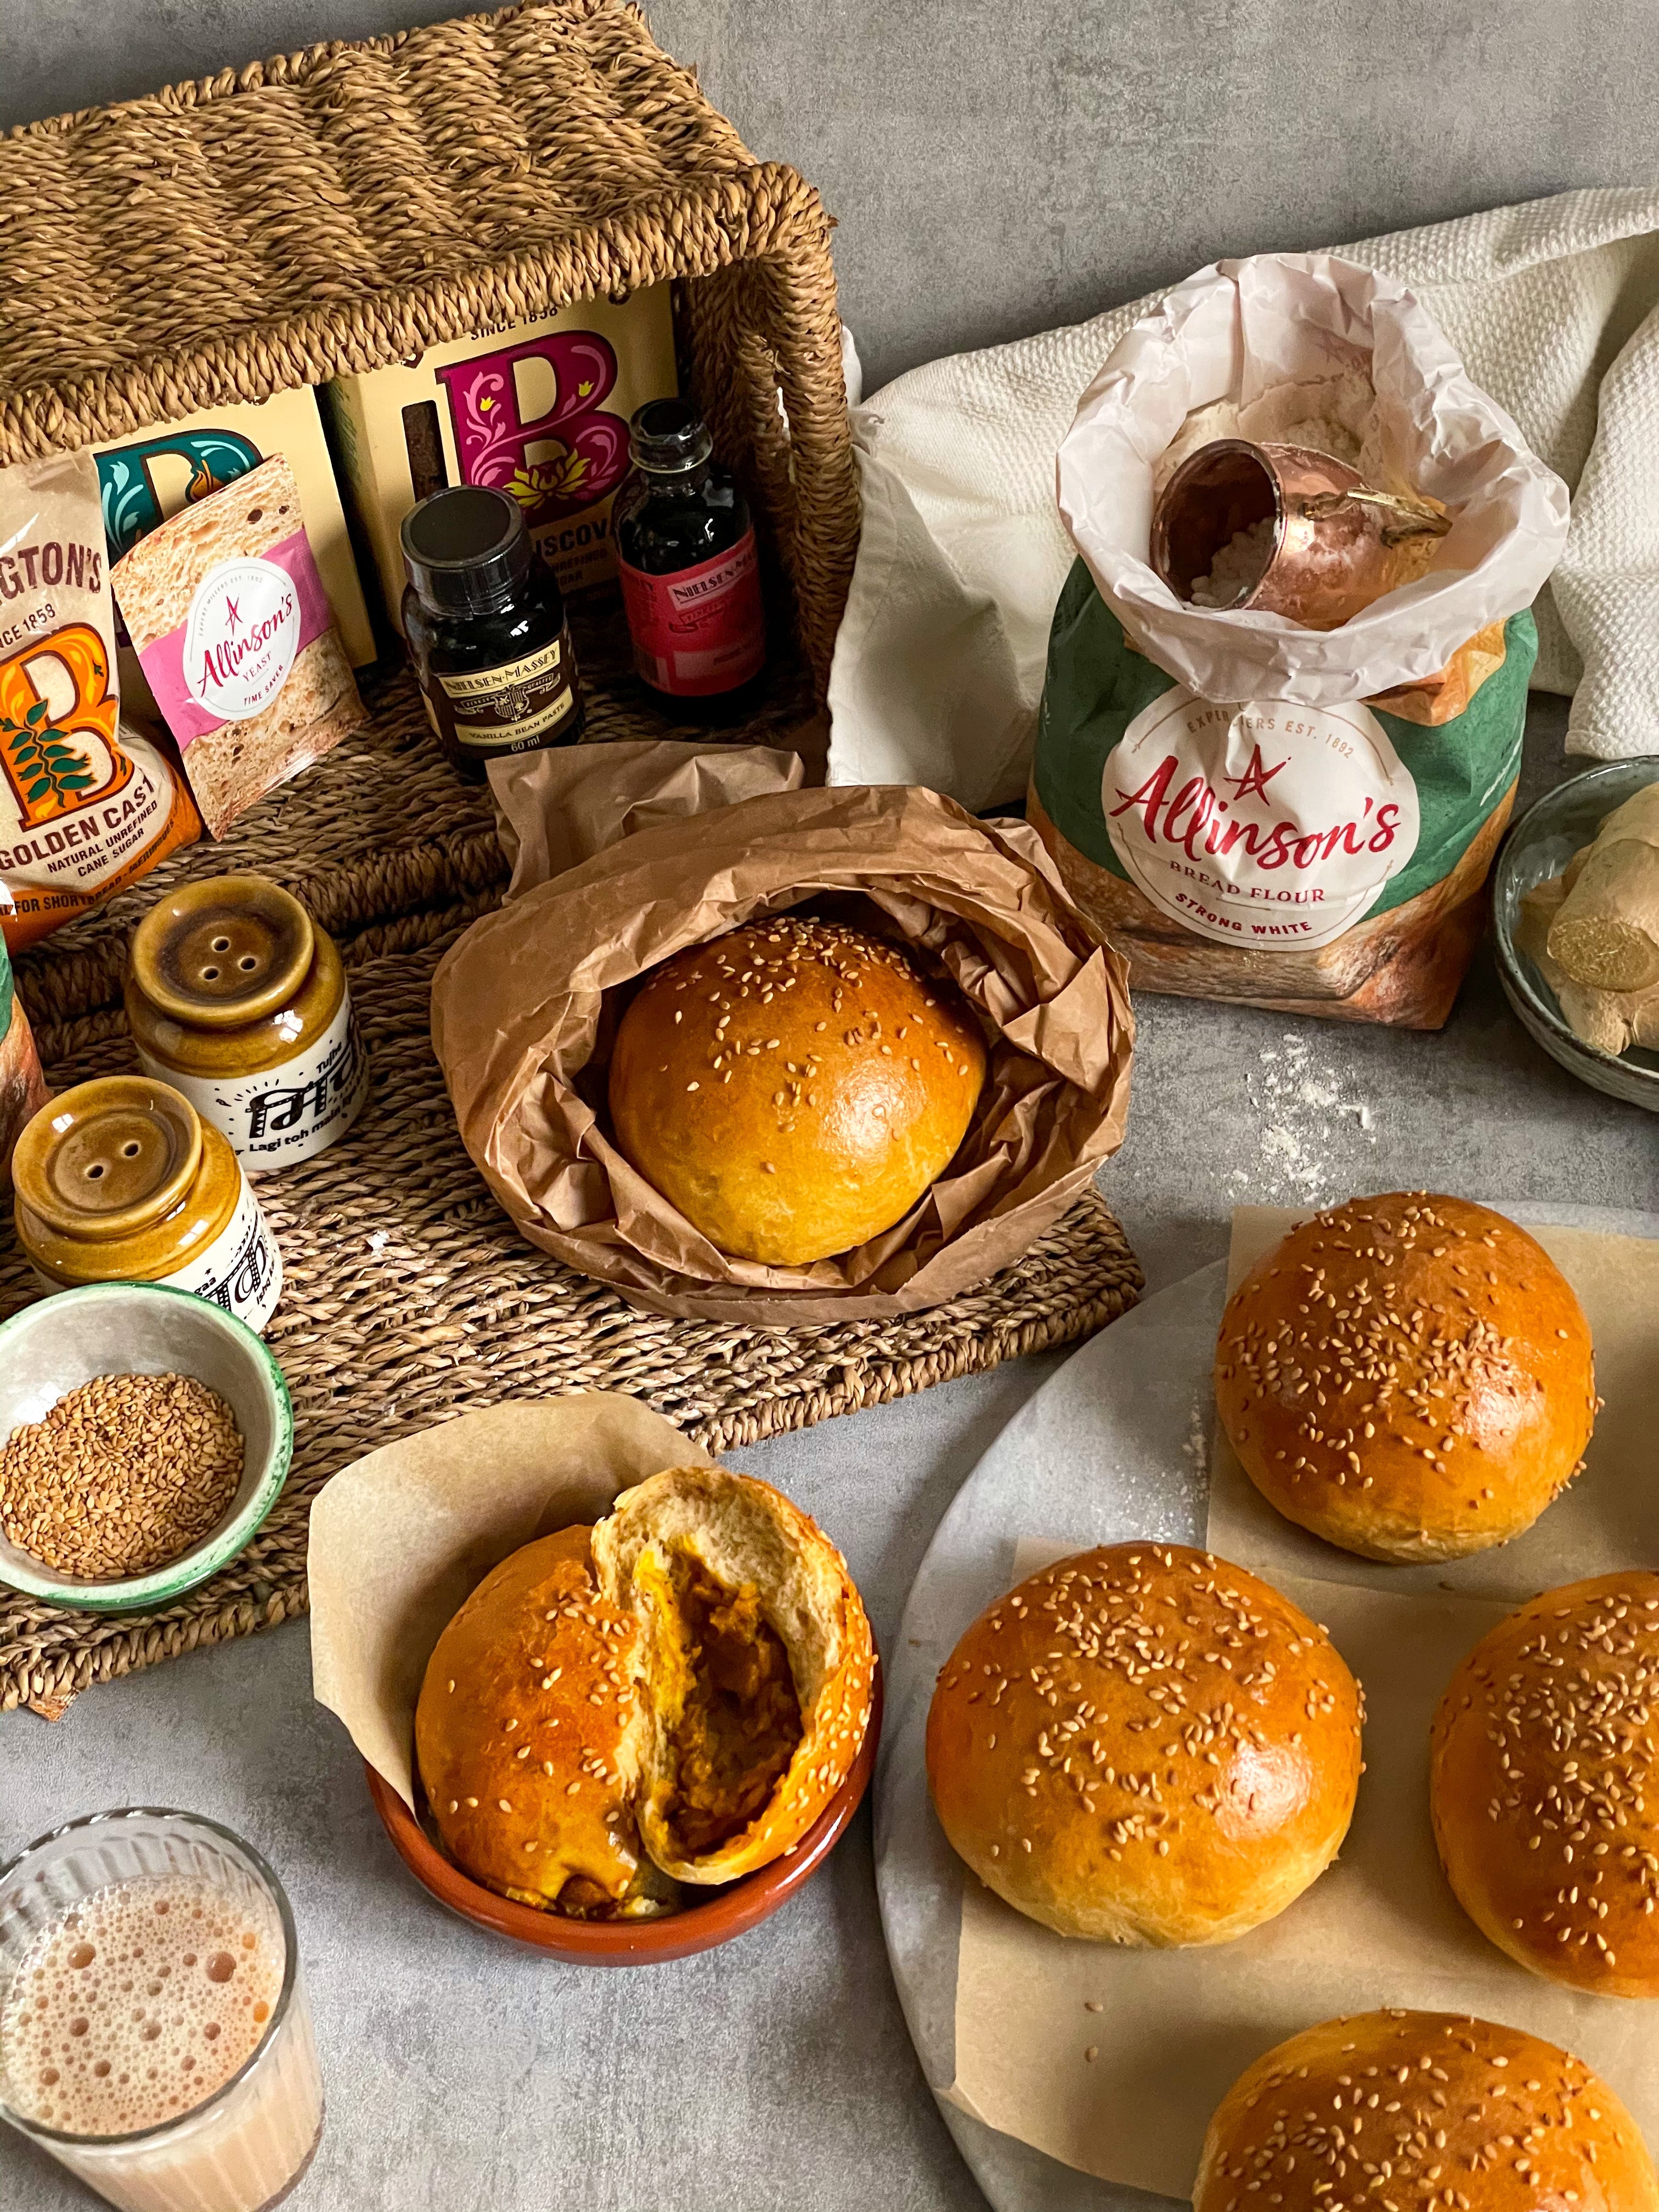 Top down view of spiced masala buns next to a hamper filled with baking ingredients